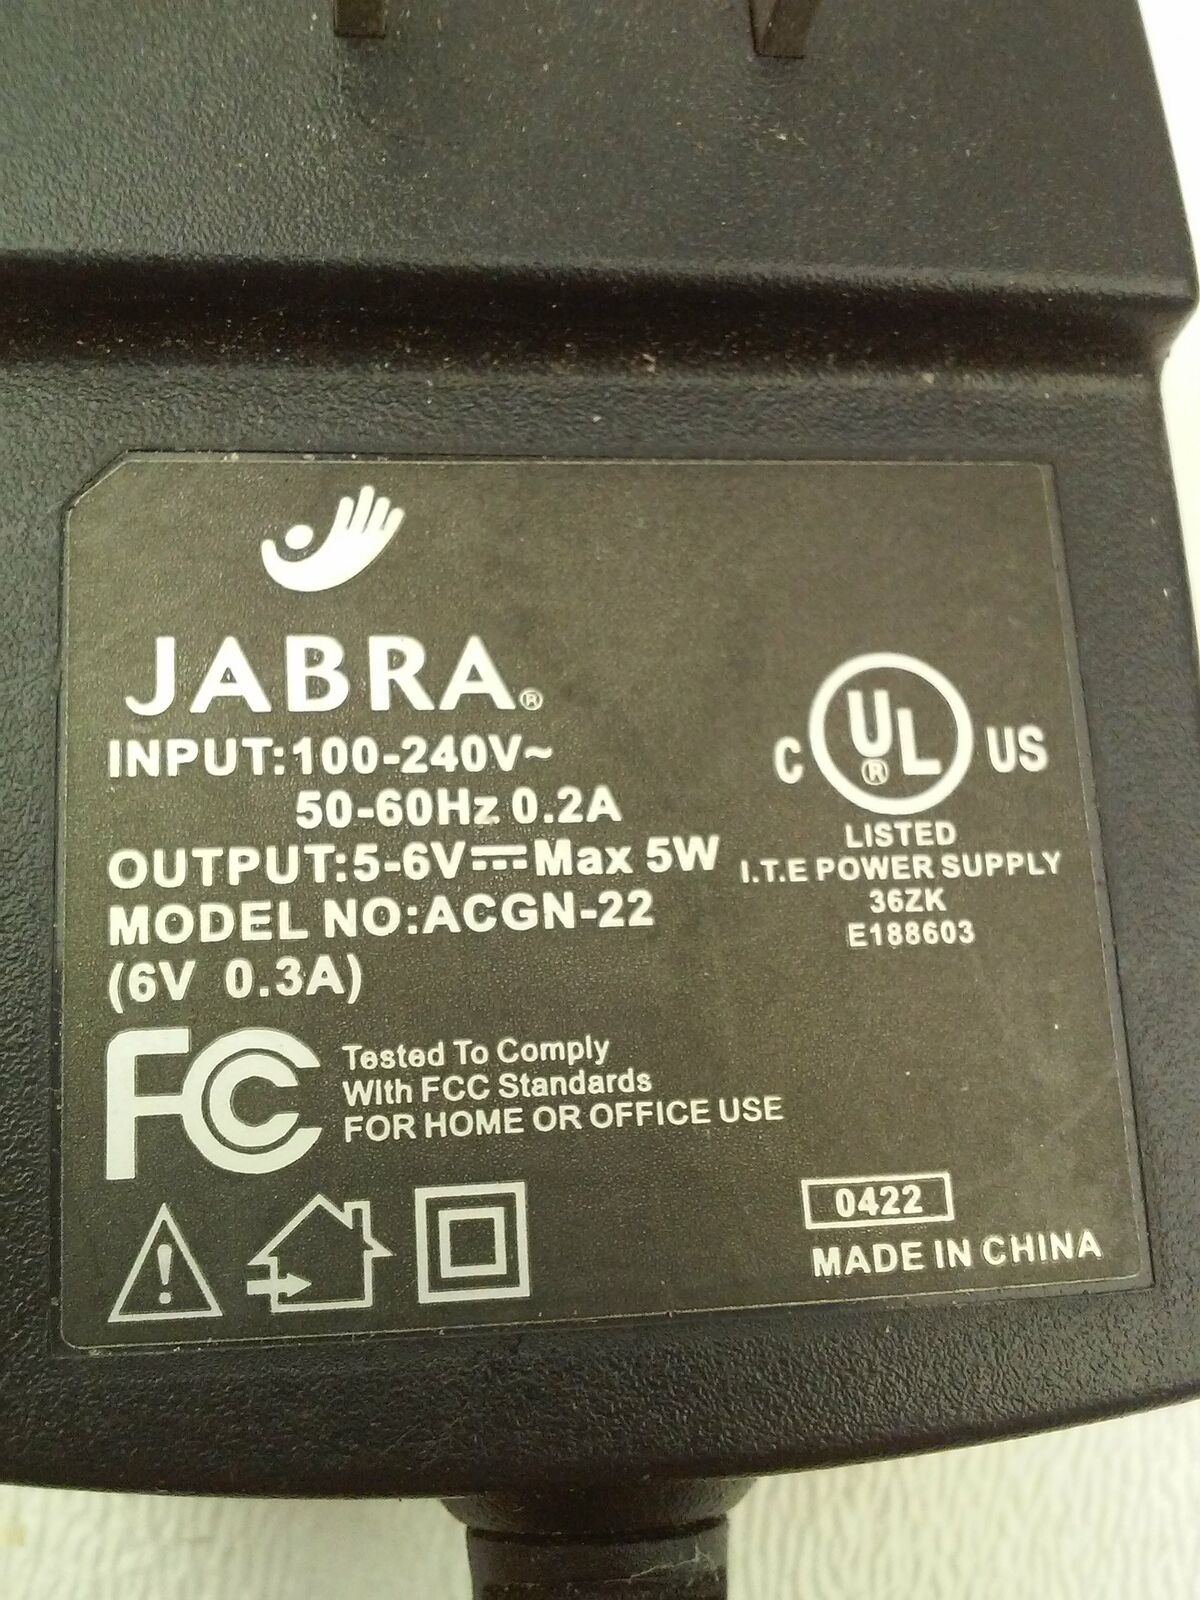 NEW Jabra ACGN-22 5-6V 0.3A Adapter Charger AC Power Supply - Click Image to Close